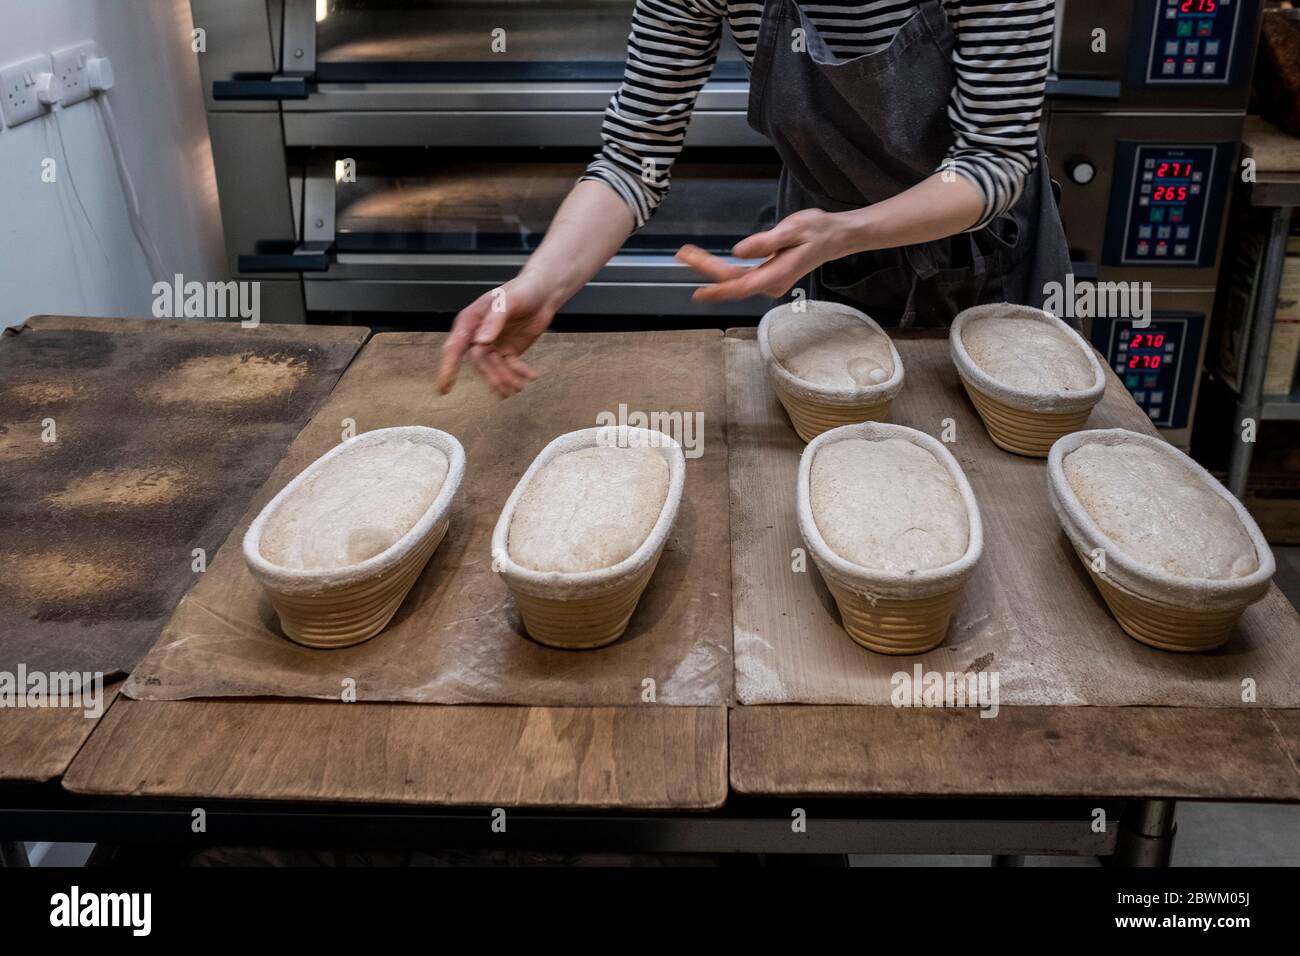 Artisan bakery making special sourdough bread, a rack of proving baskets full of rising dough. Stock Photo